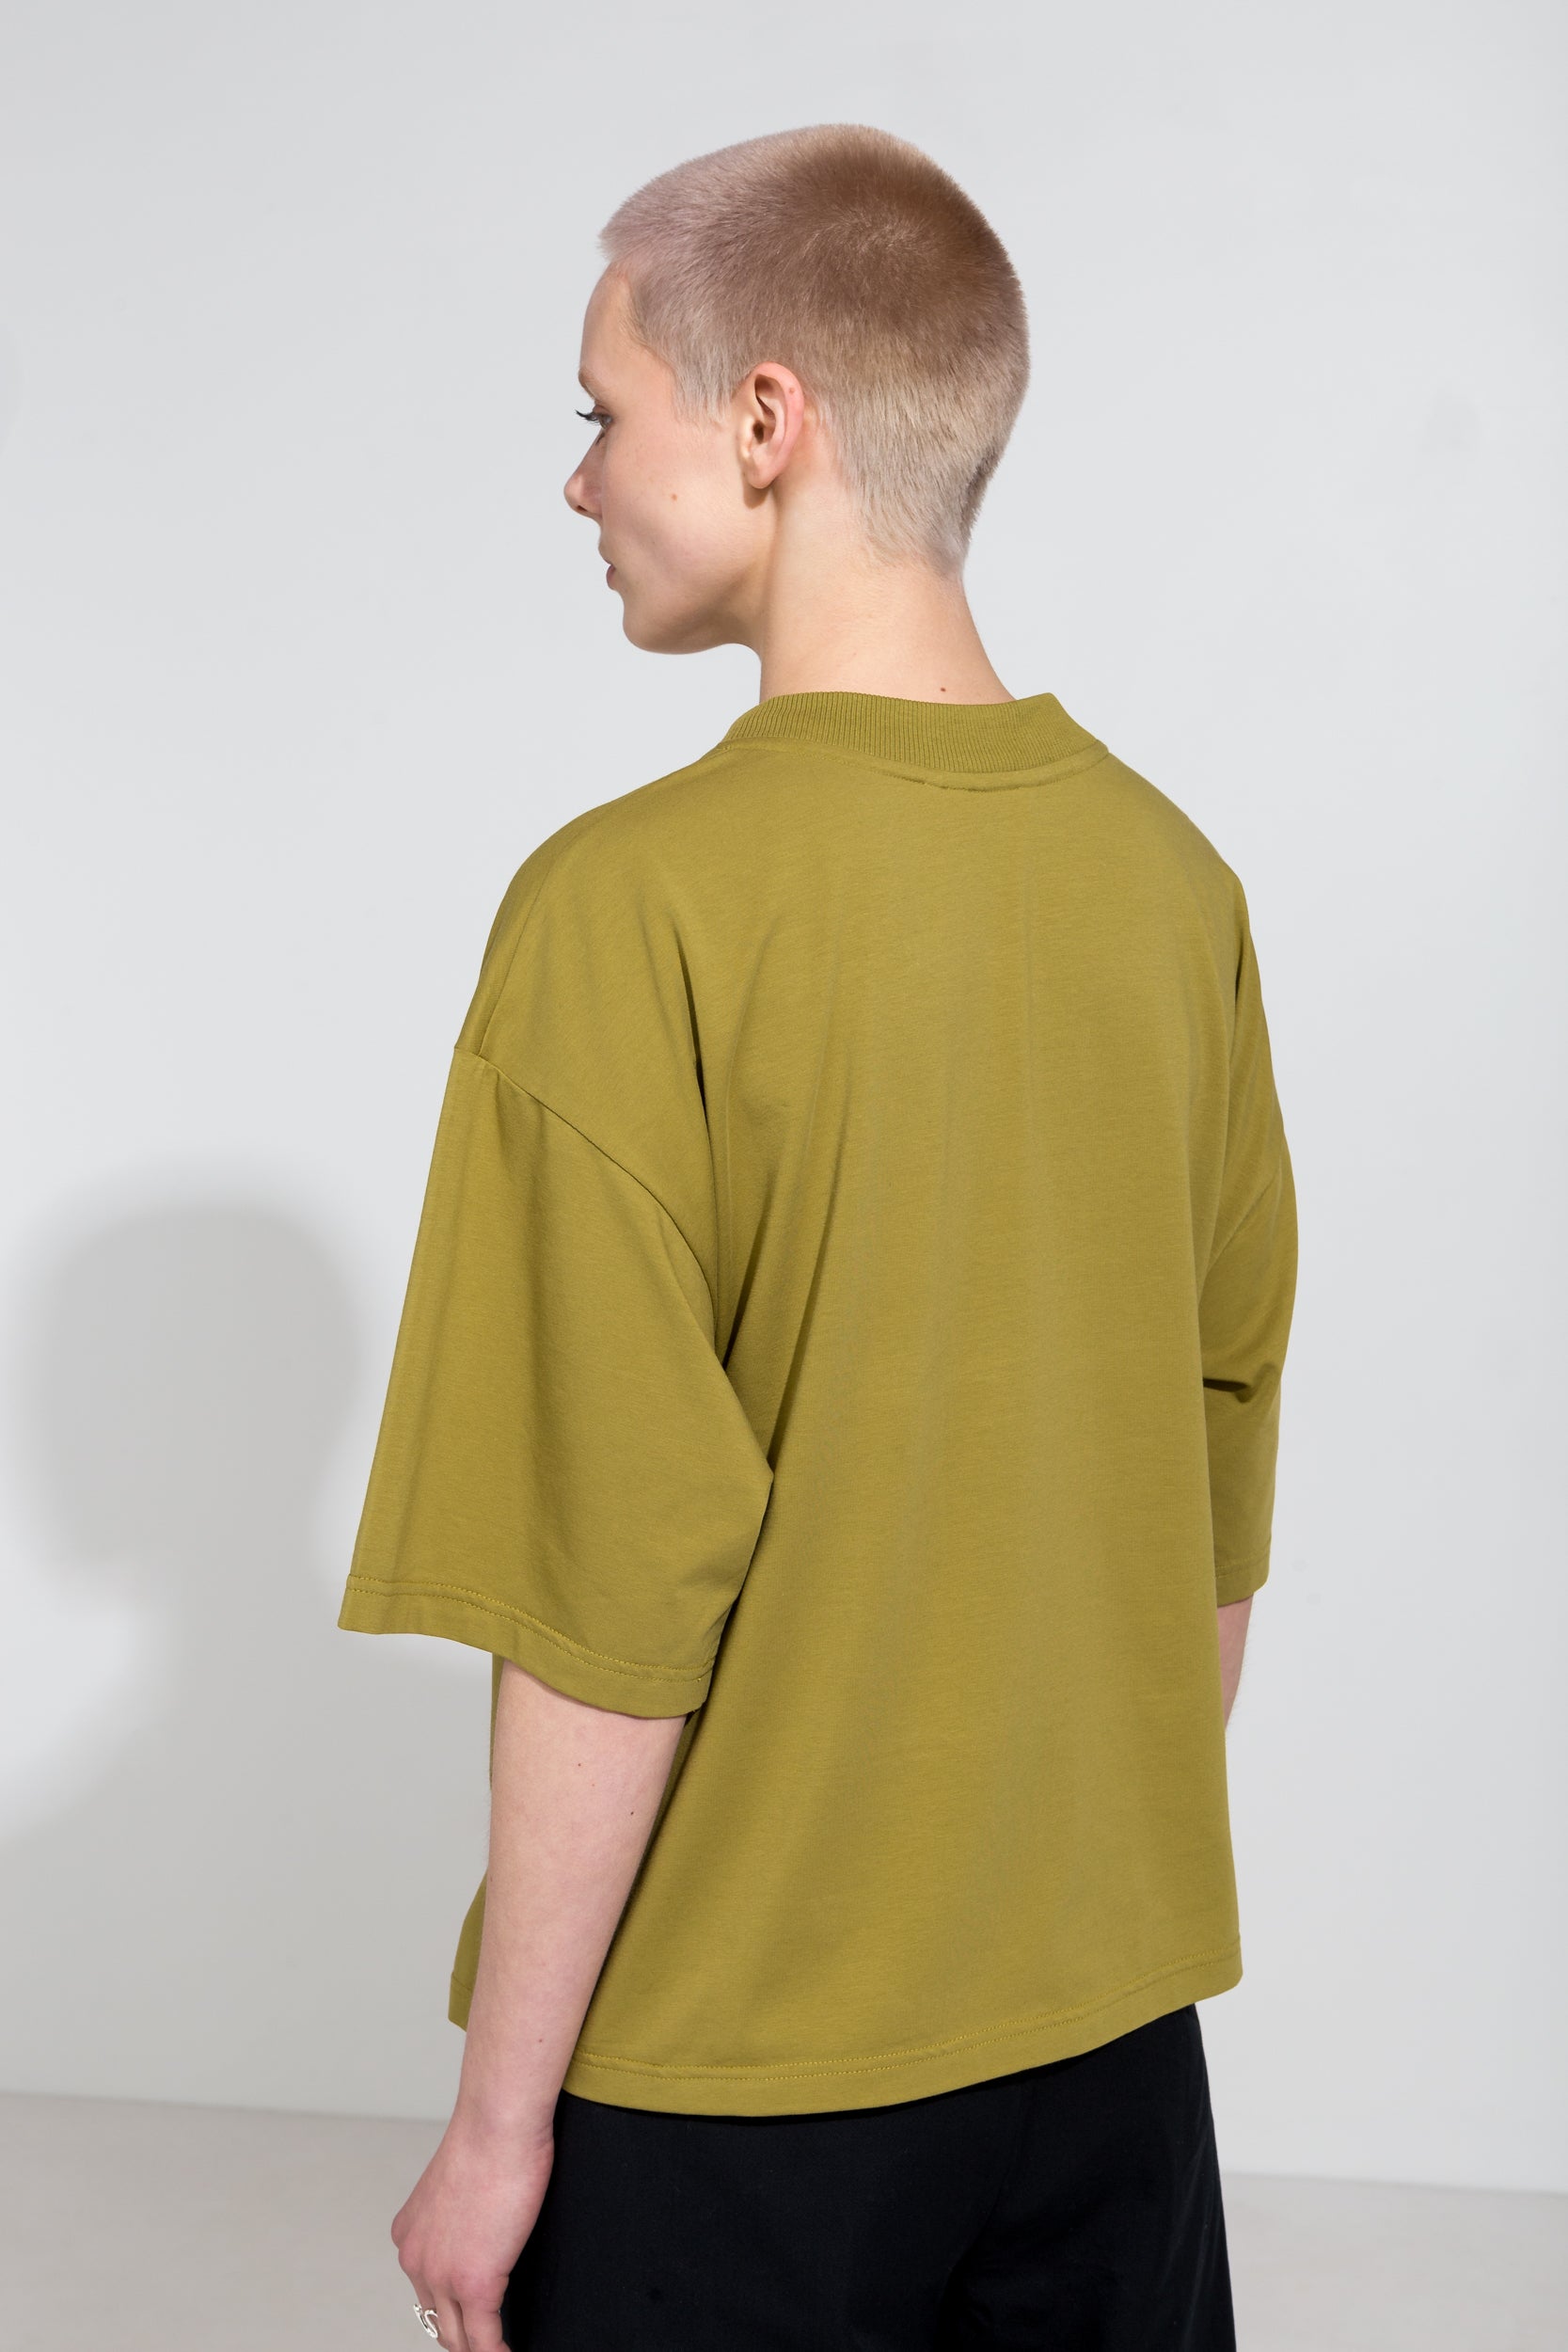 Oversize organic t-shirt in olive green